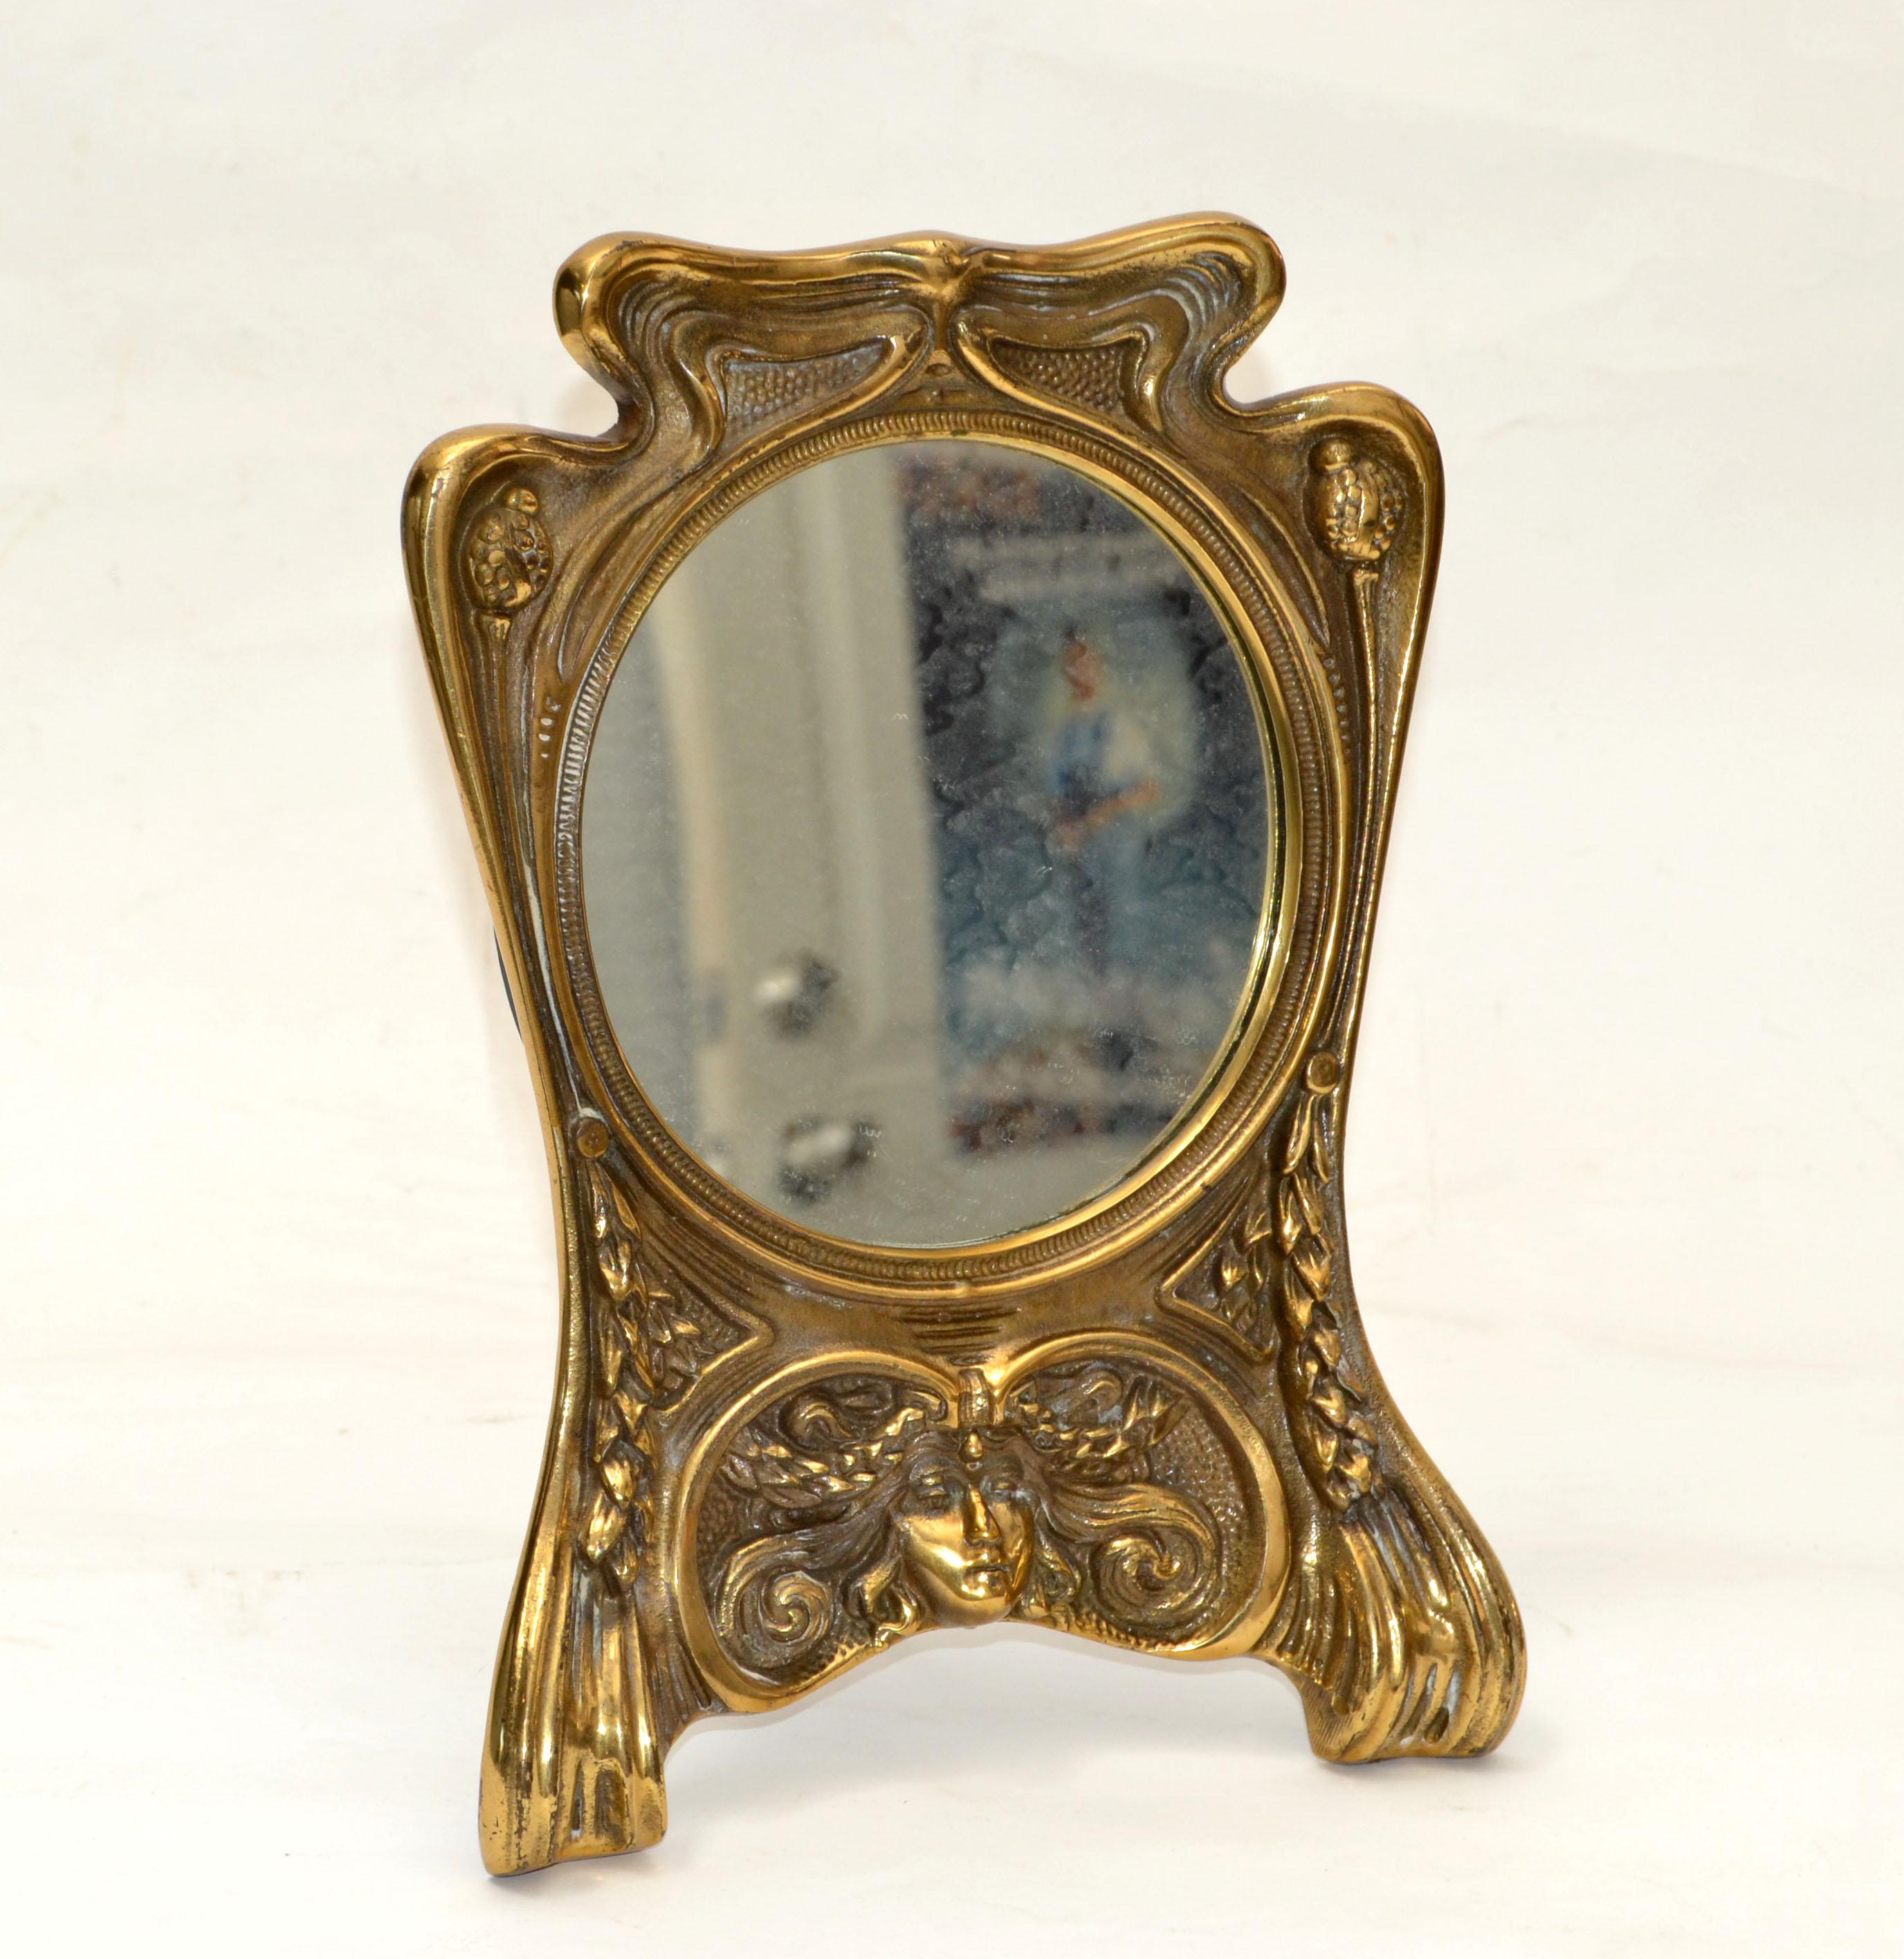 Art Nouveau Whimsical Handcrafted Golden Bronze Table Mirror Vanity Mirror 1940 For Sale 1